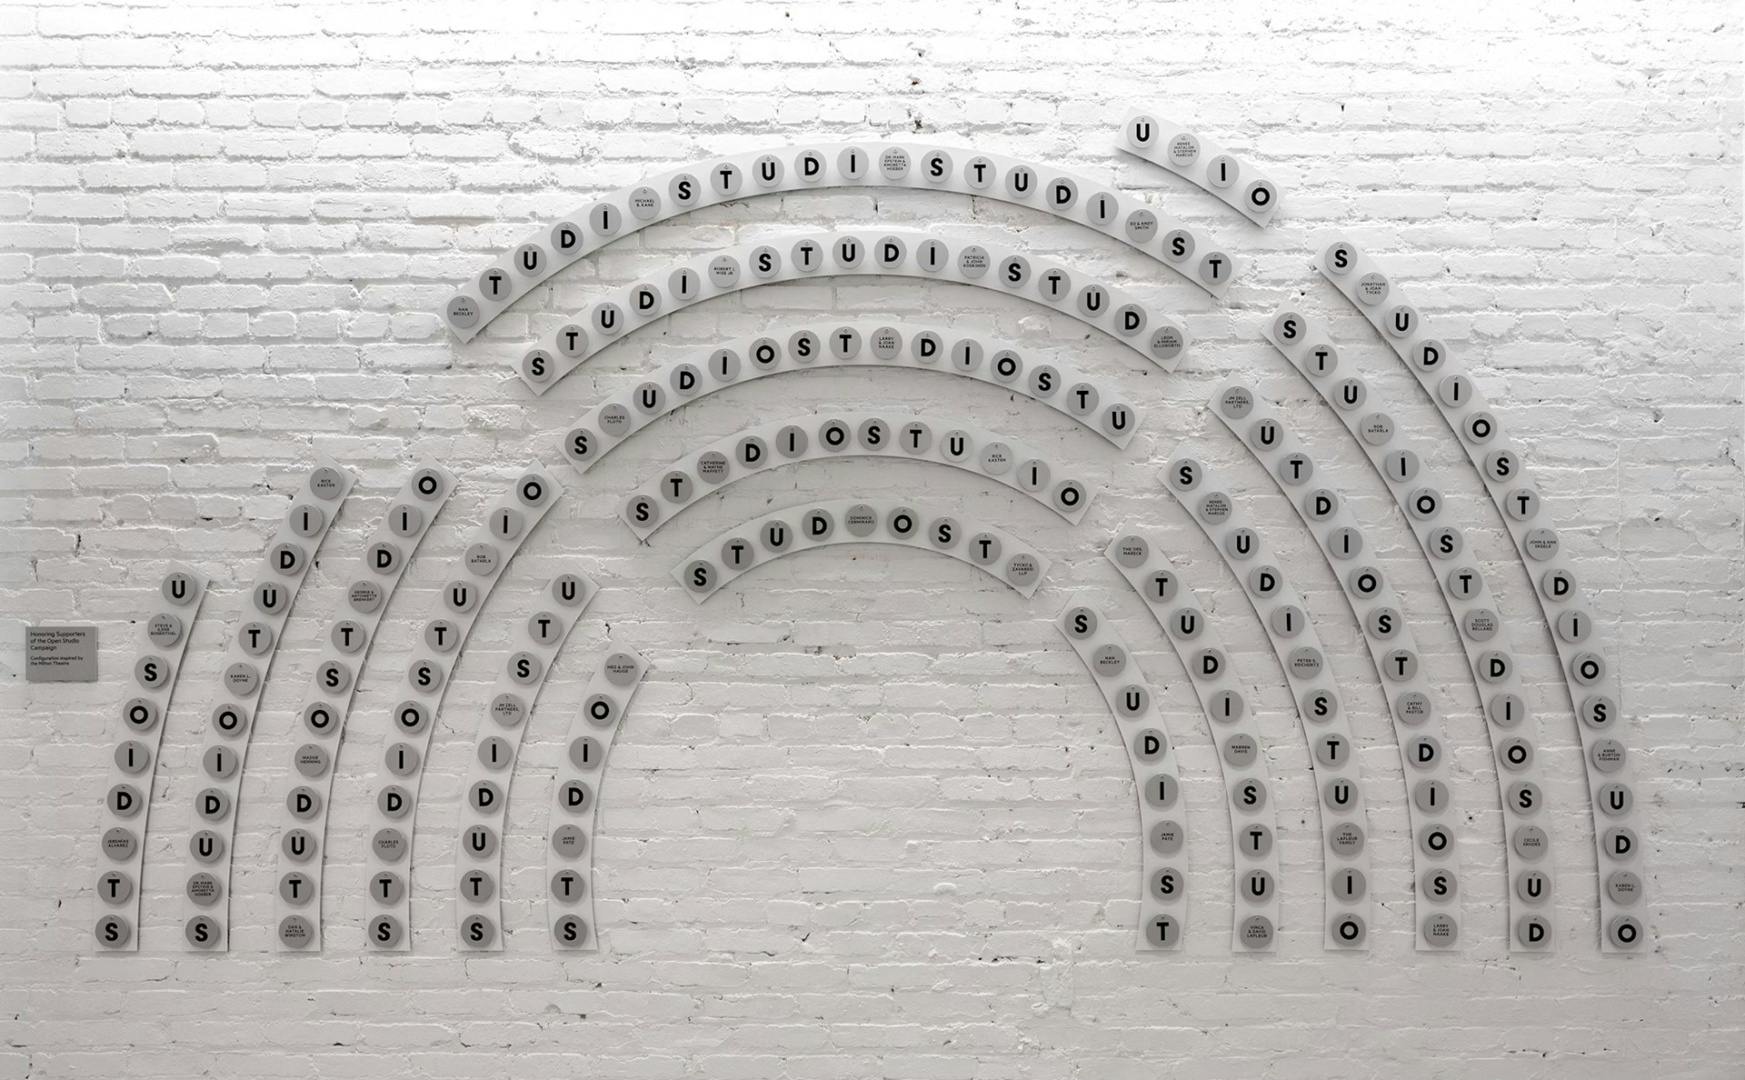 Wall installation in the shape of semi-circular rows of theatre seats